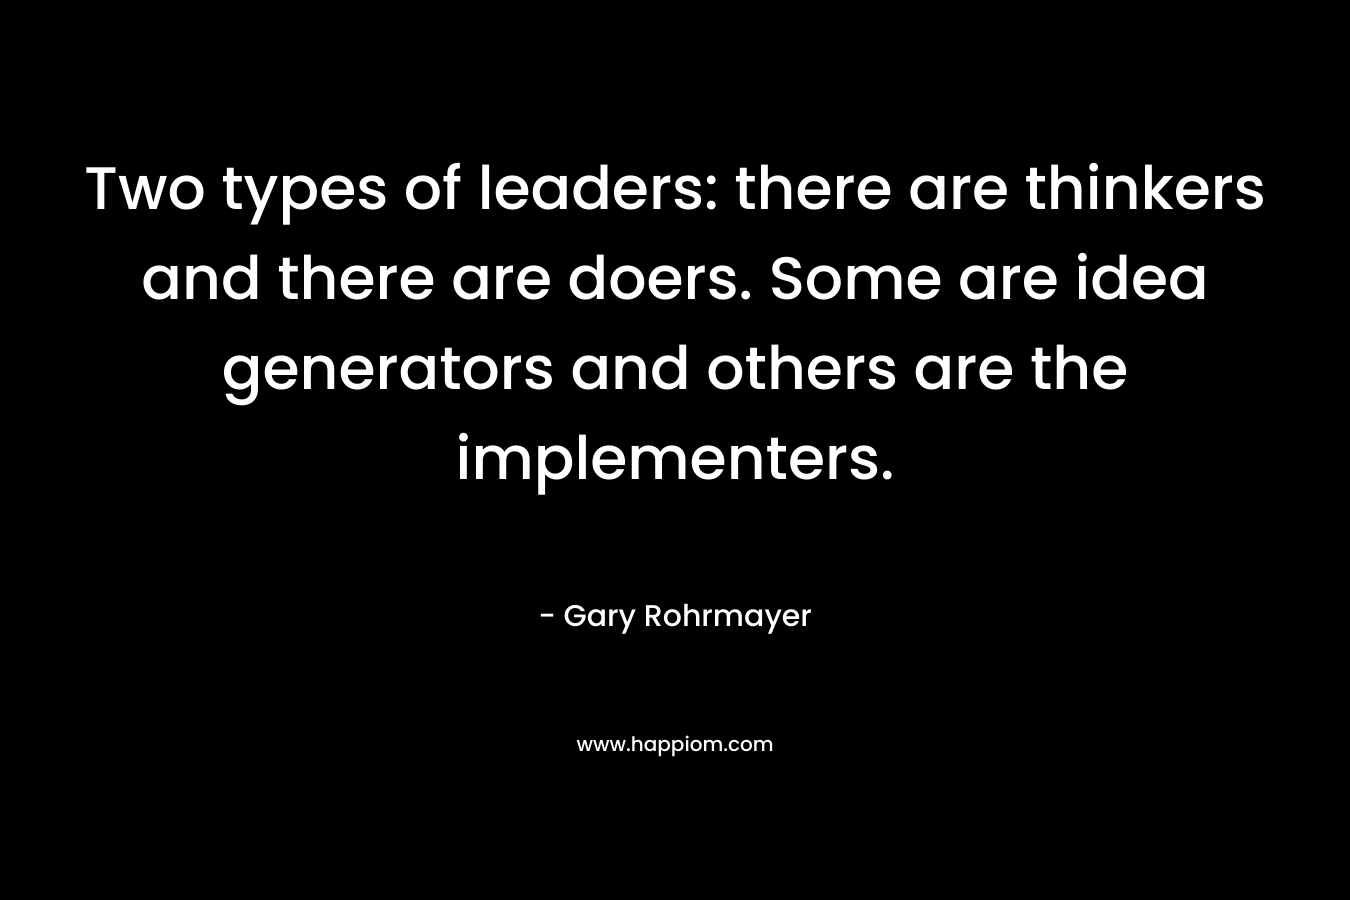 Two types of leaders: there are thinkers and there are doers. Some are idea generators and others are the implementers. – Gary Rohrmayer